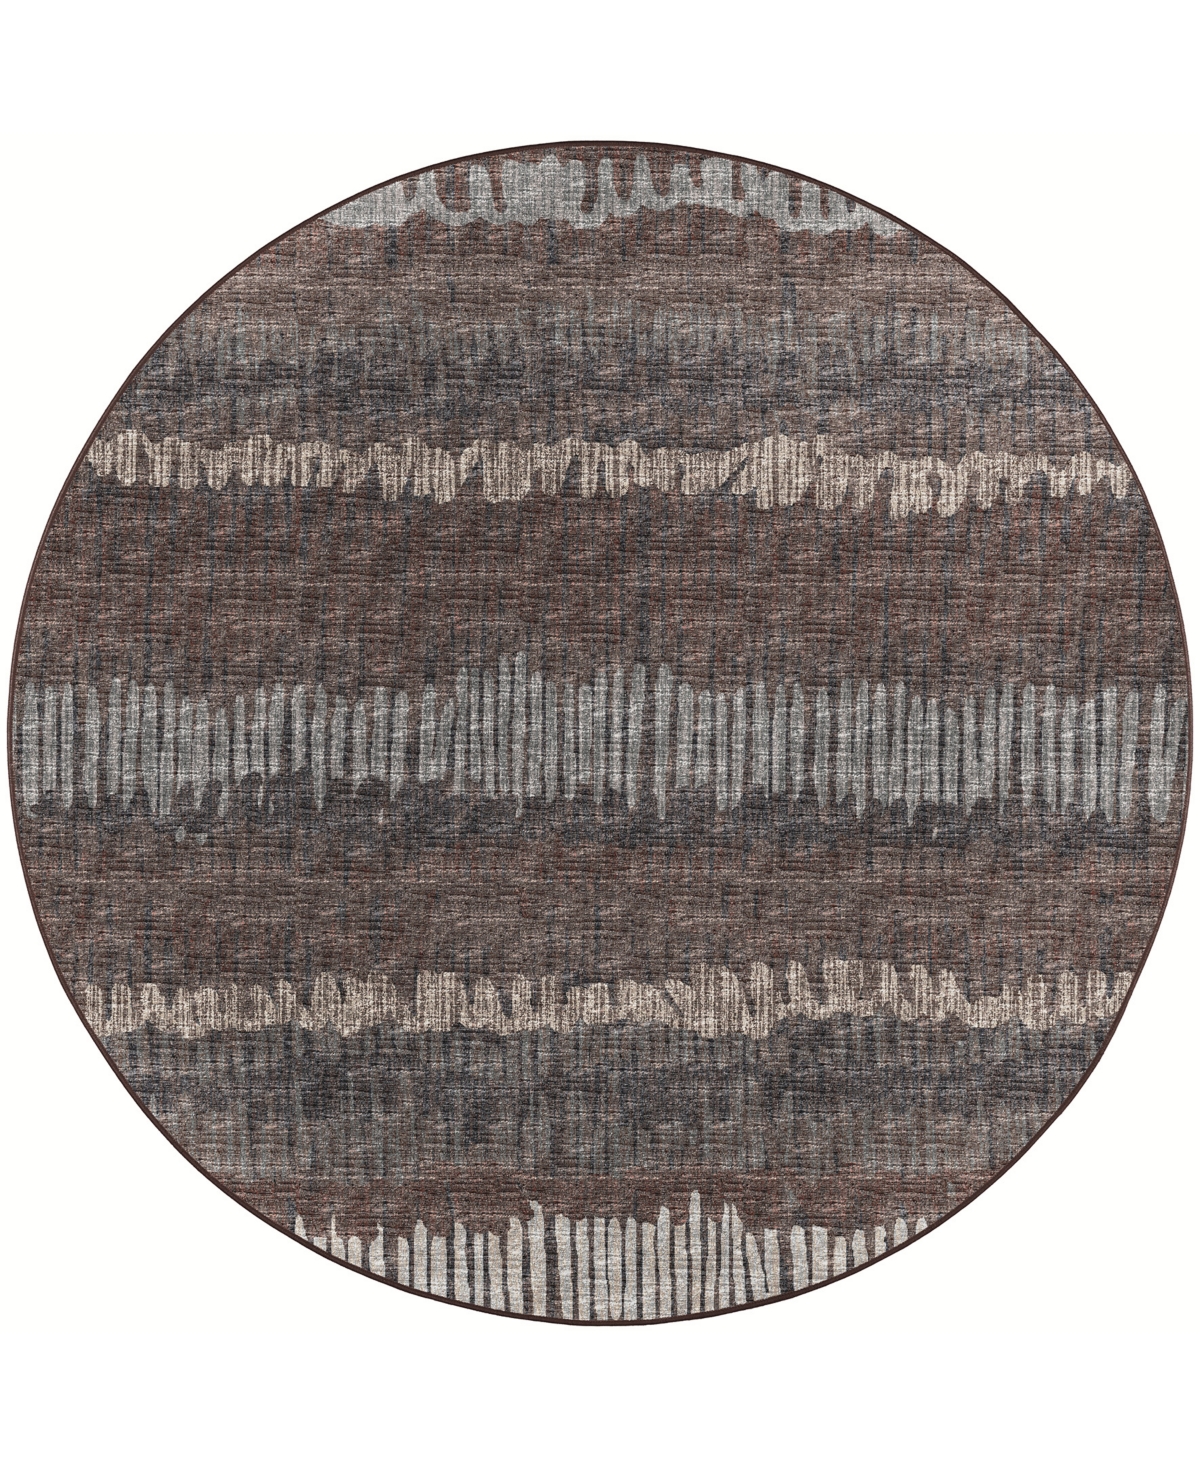 D Style Briggs Brg-4 8' x 8' Round Area Rug - Coffee